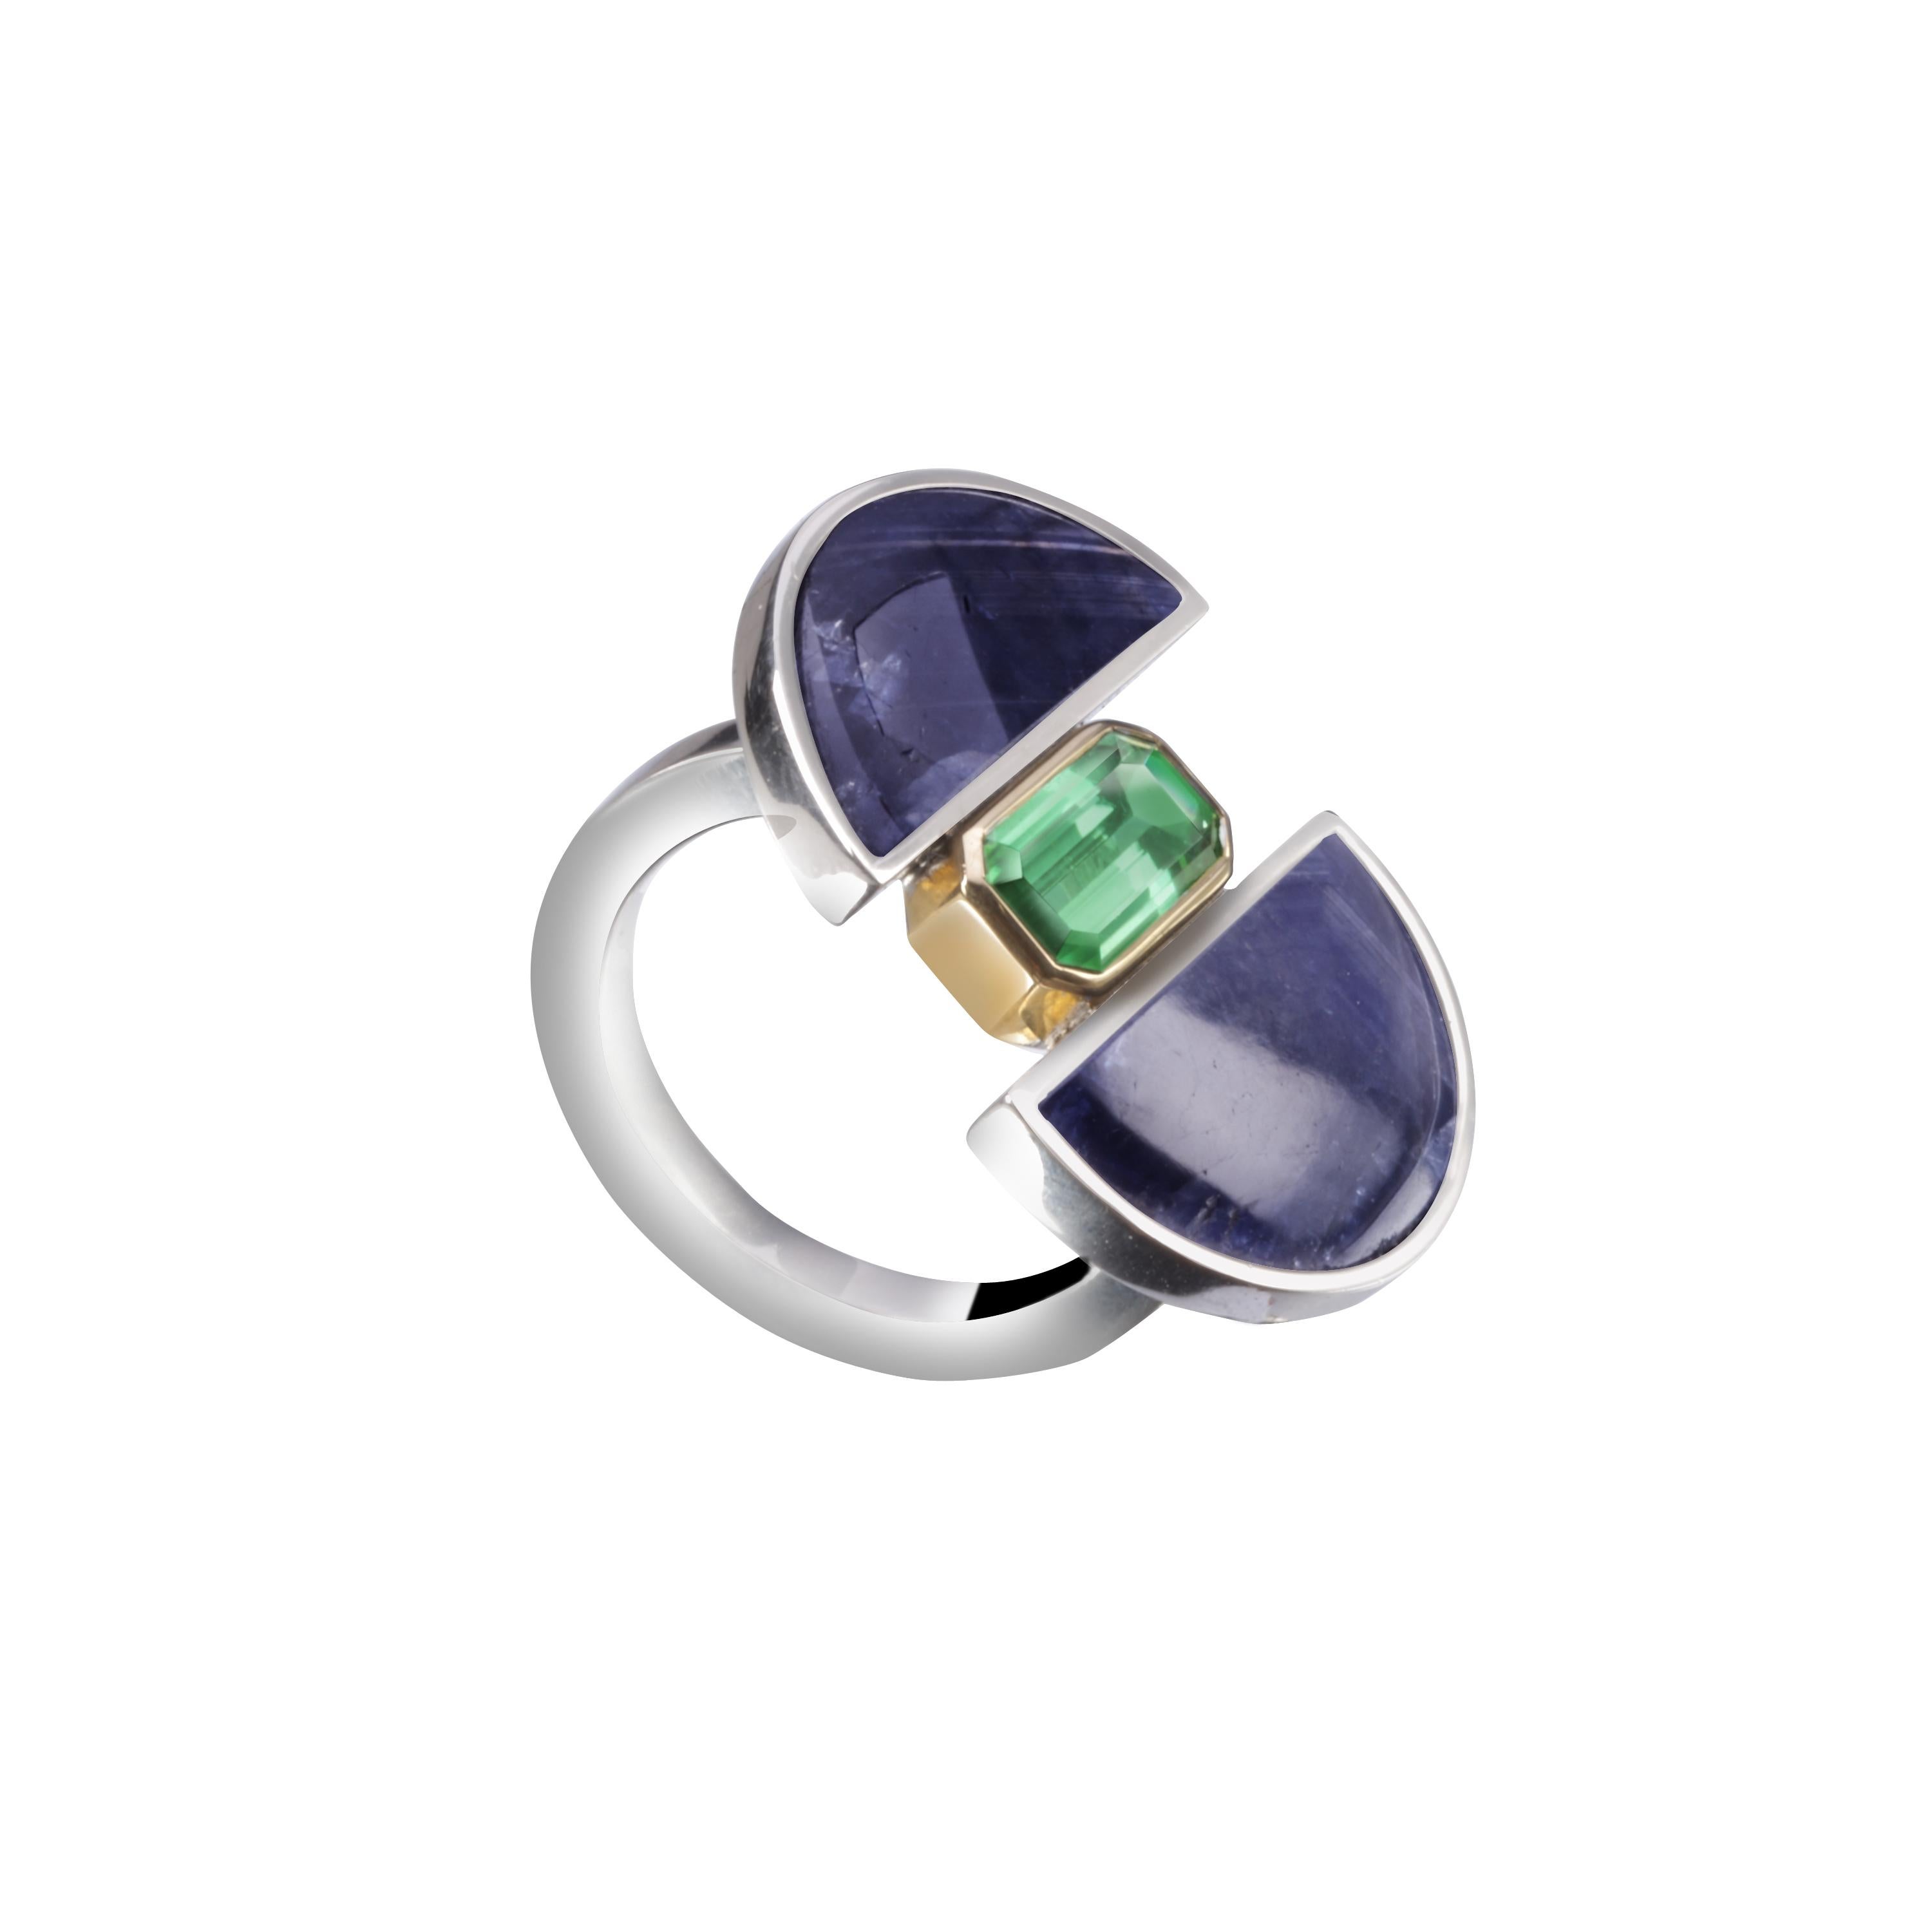 This ring is handmade in Sterling Silver and 18k yellow gold with two pieces of blue sapphire and a green tourmaline.
The main structure is made in silver, and the green tourmaline is surrounded by yellow gold, making a contrast.
It is a unique